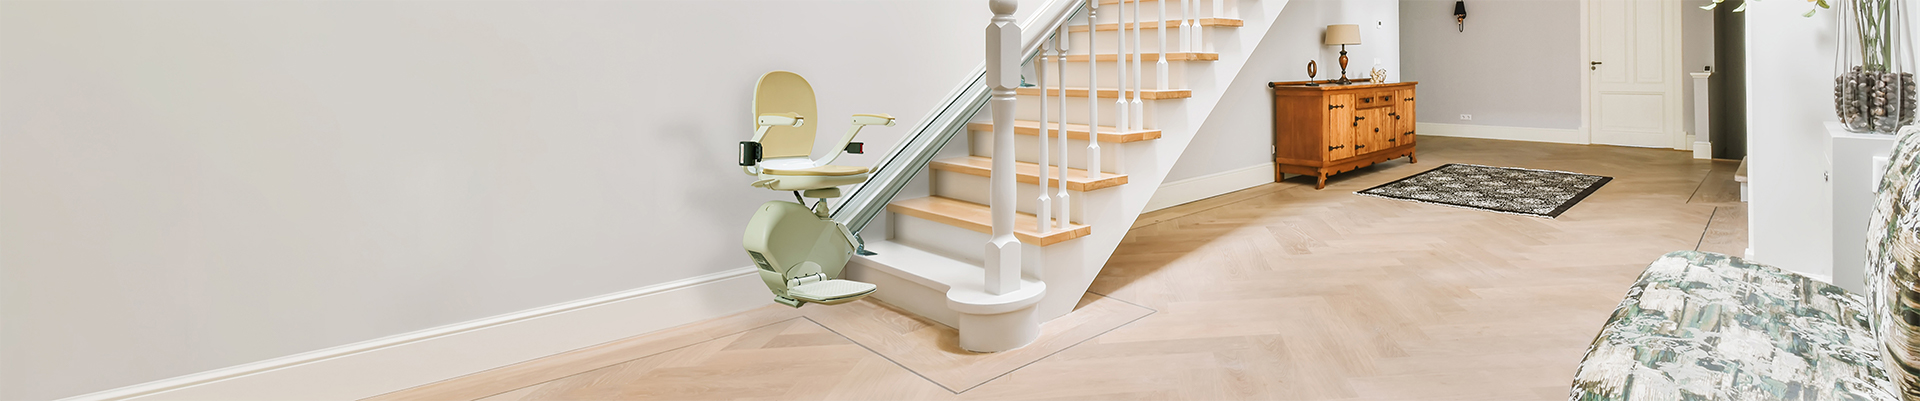 Stairlifts in a Manchester home